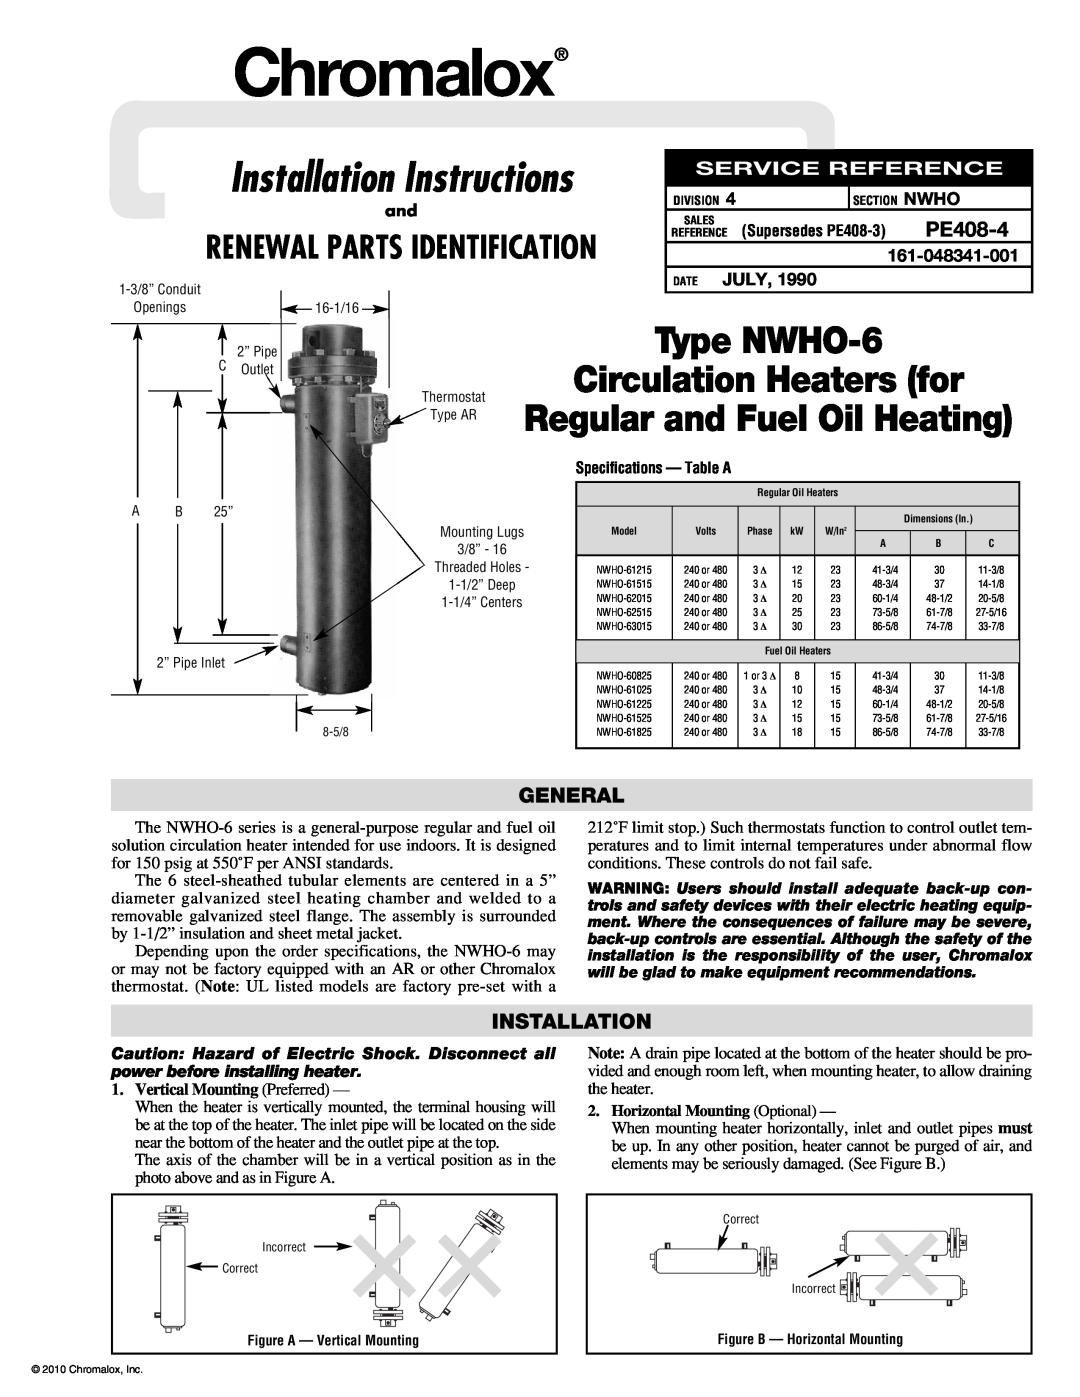 Chromalox installation instructions General, Installation, Chromalox, Circulation Heaters for, Type NWHO-6, Date July 